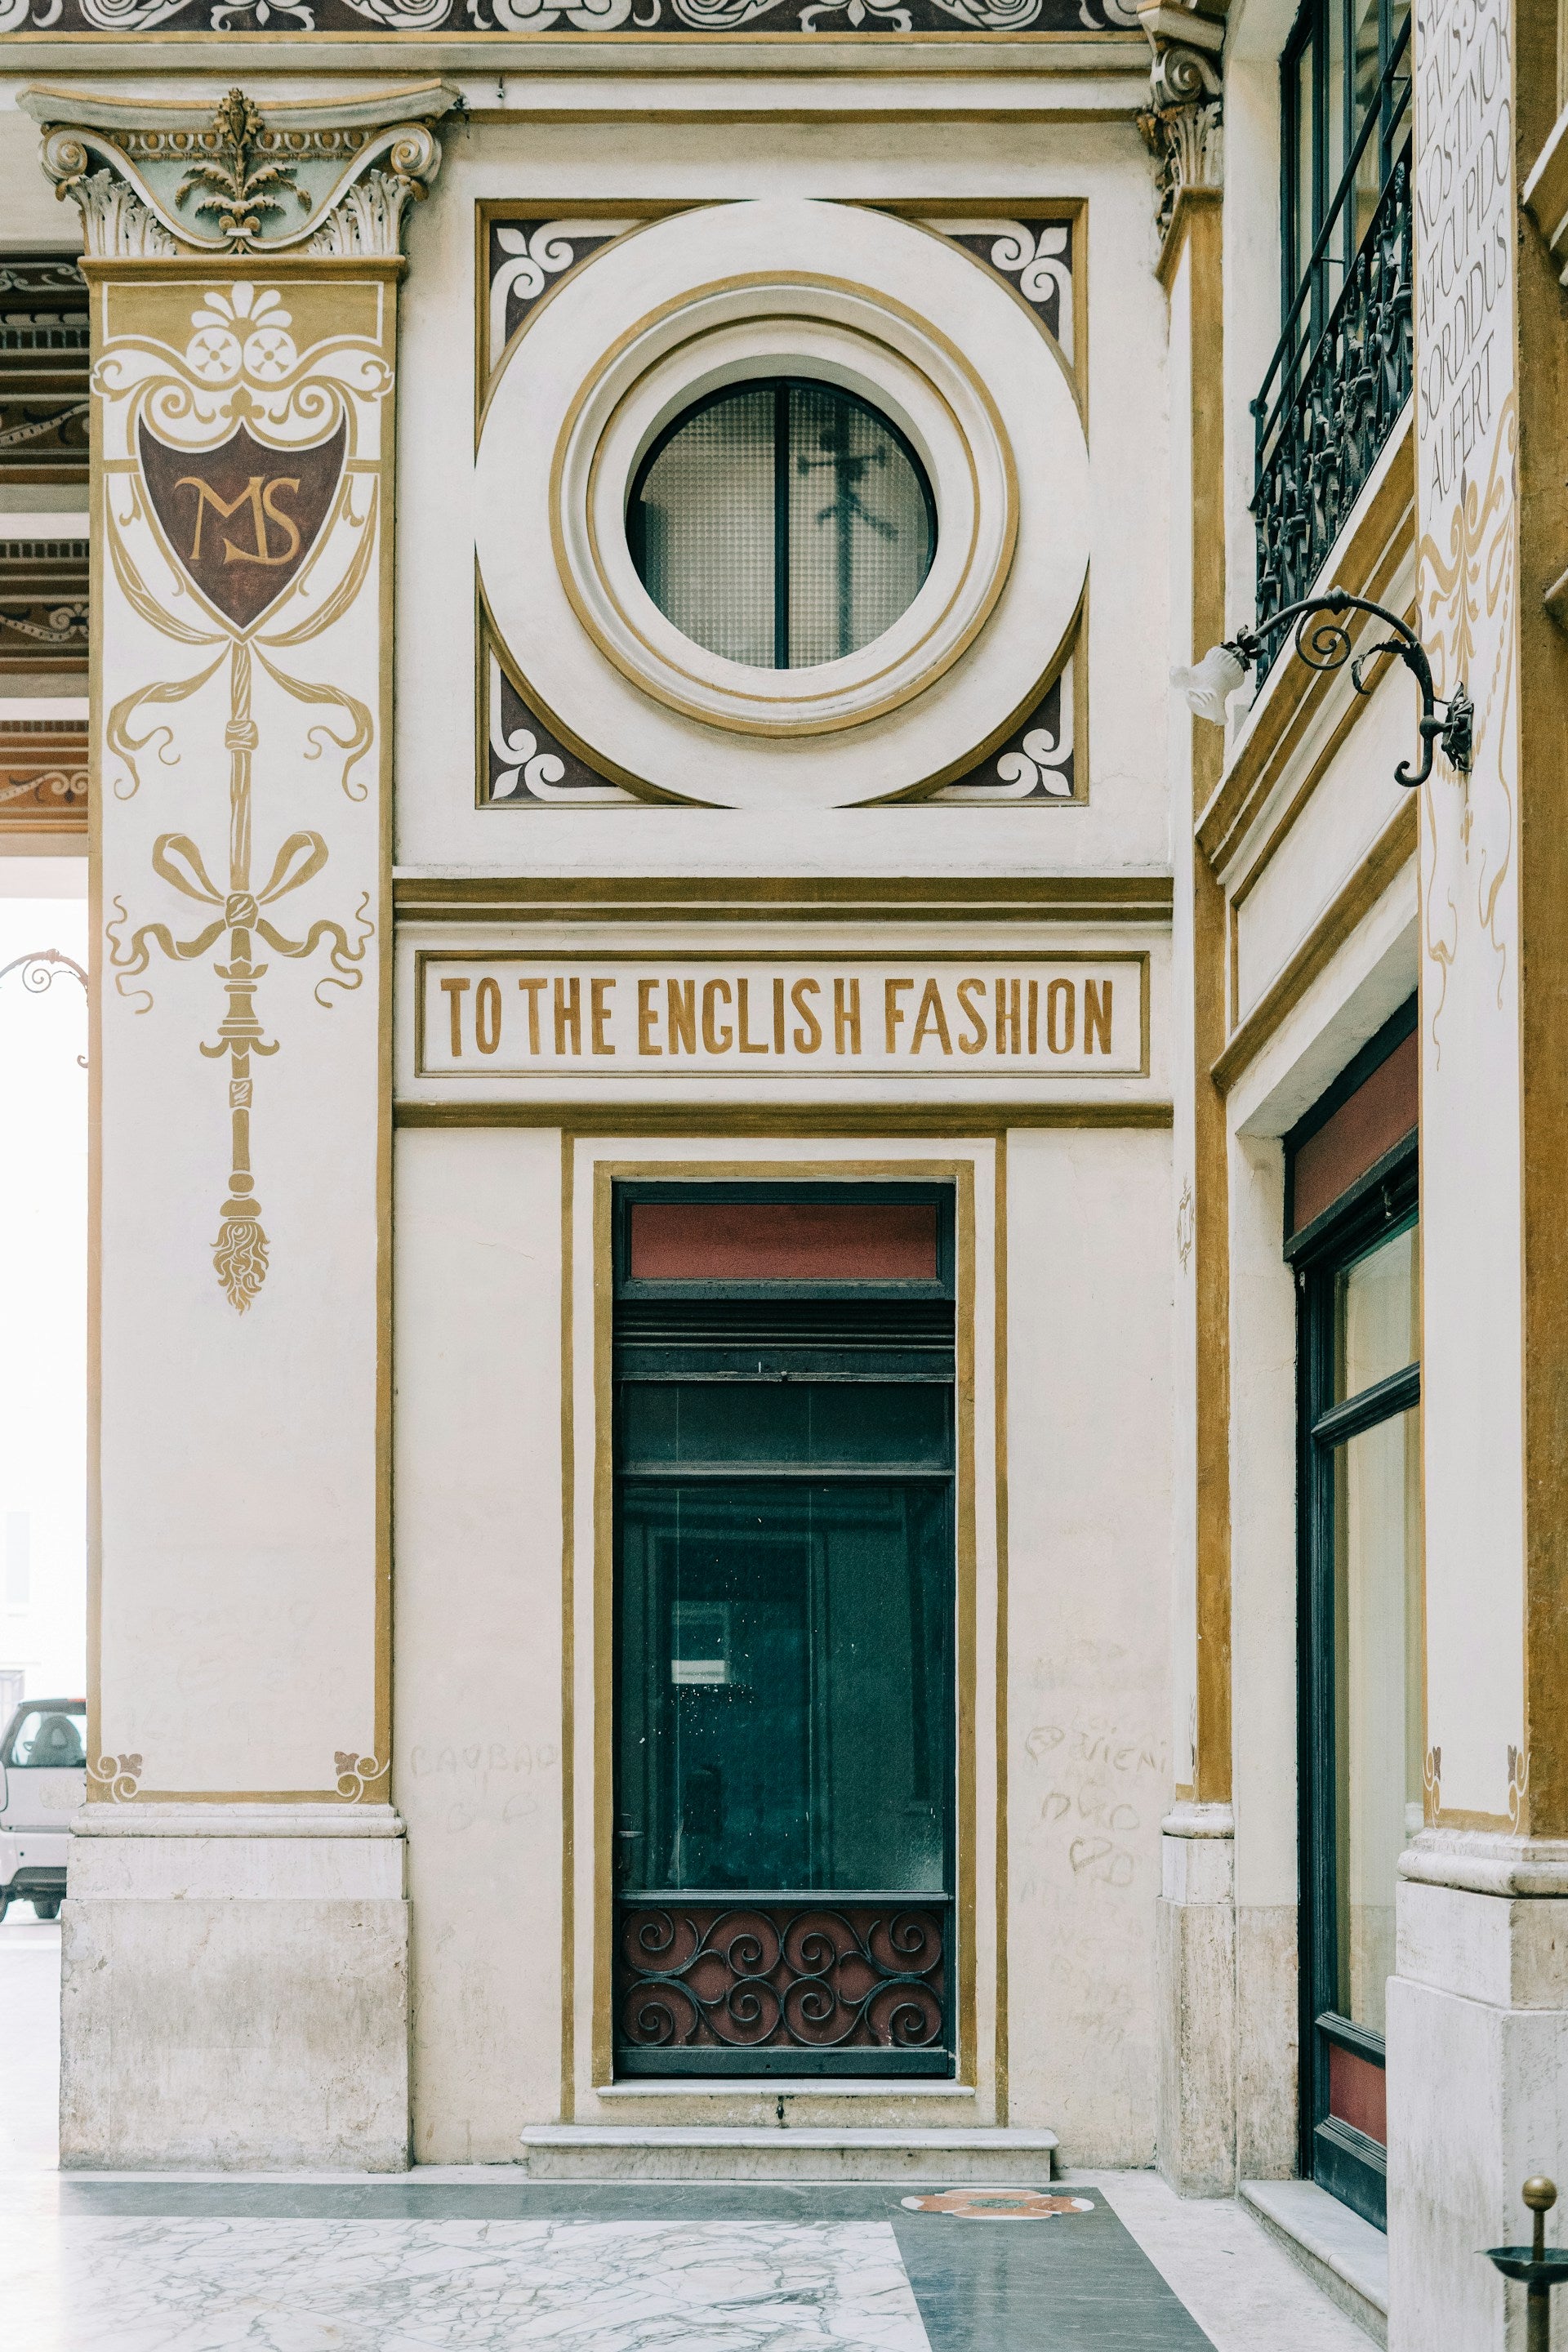 An old building in Italy with a sign and a circular window.